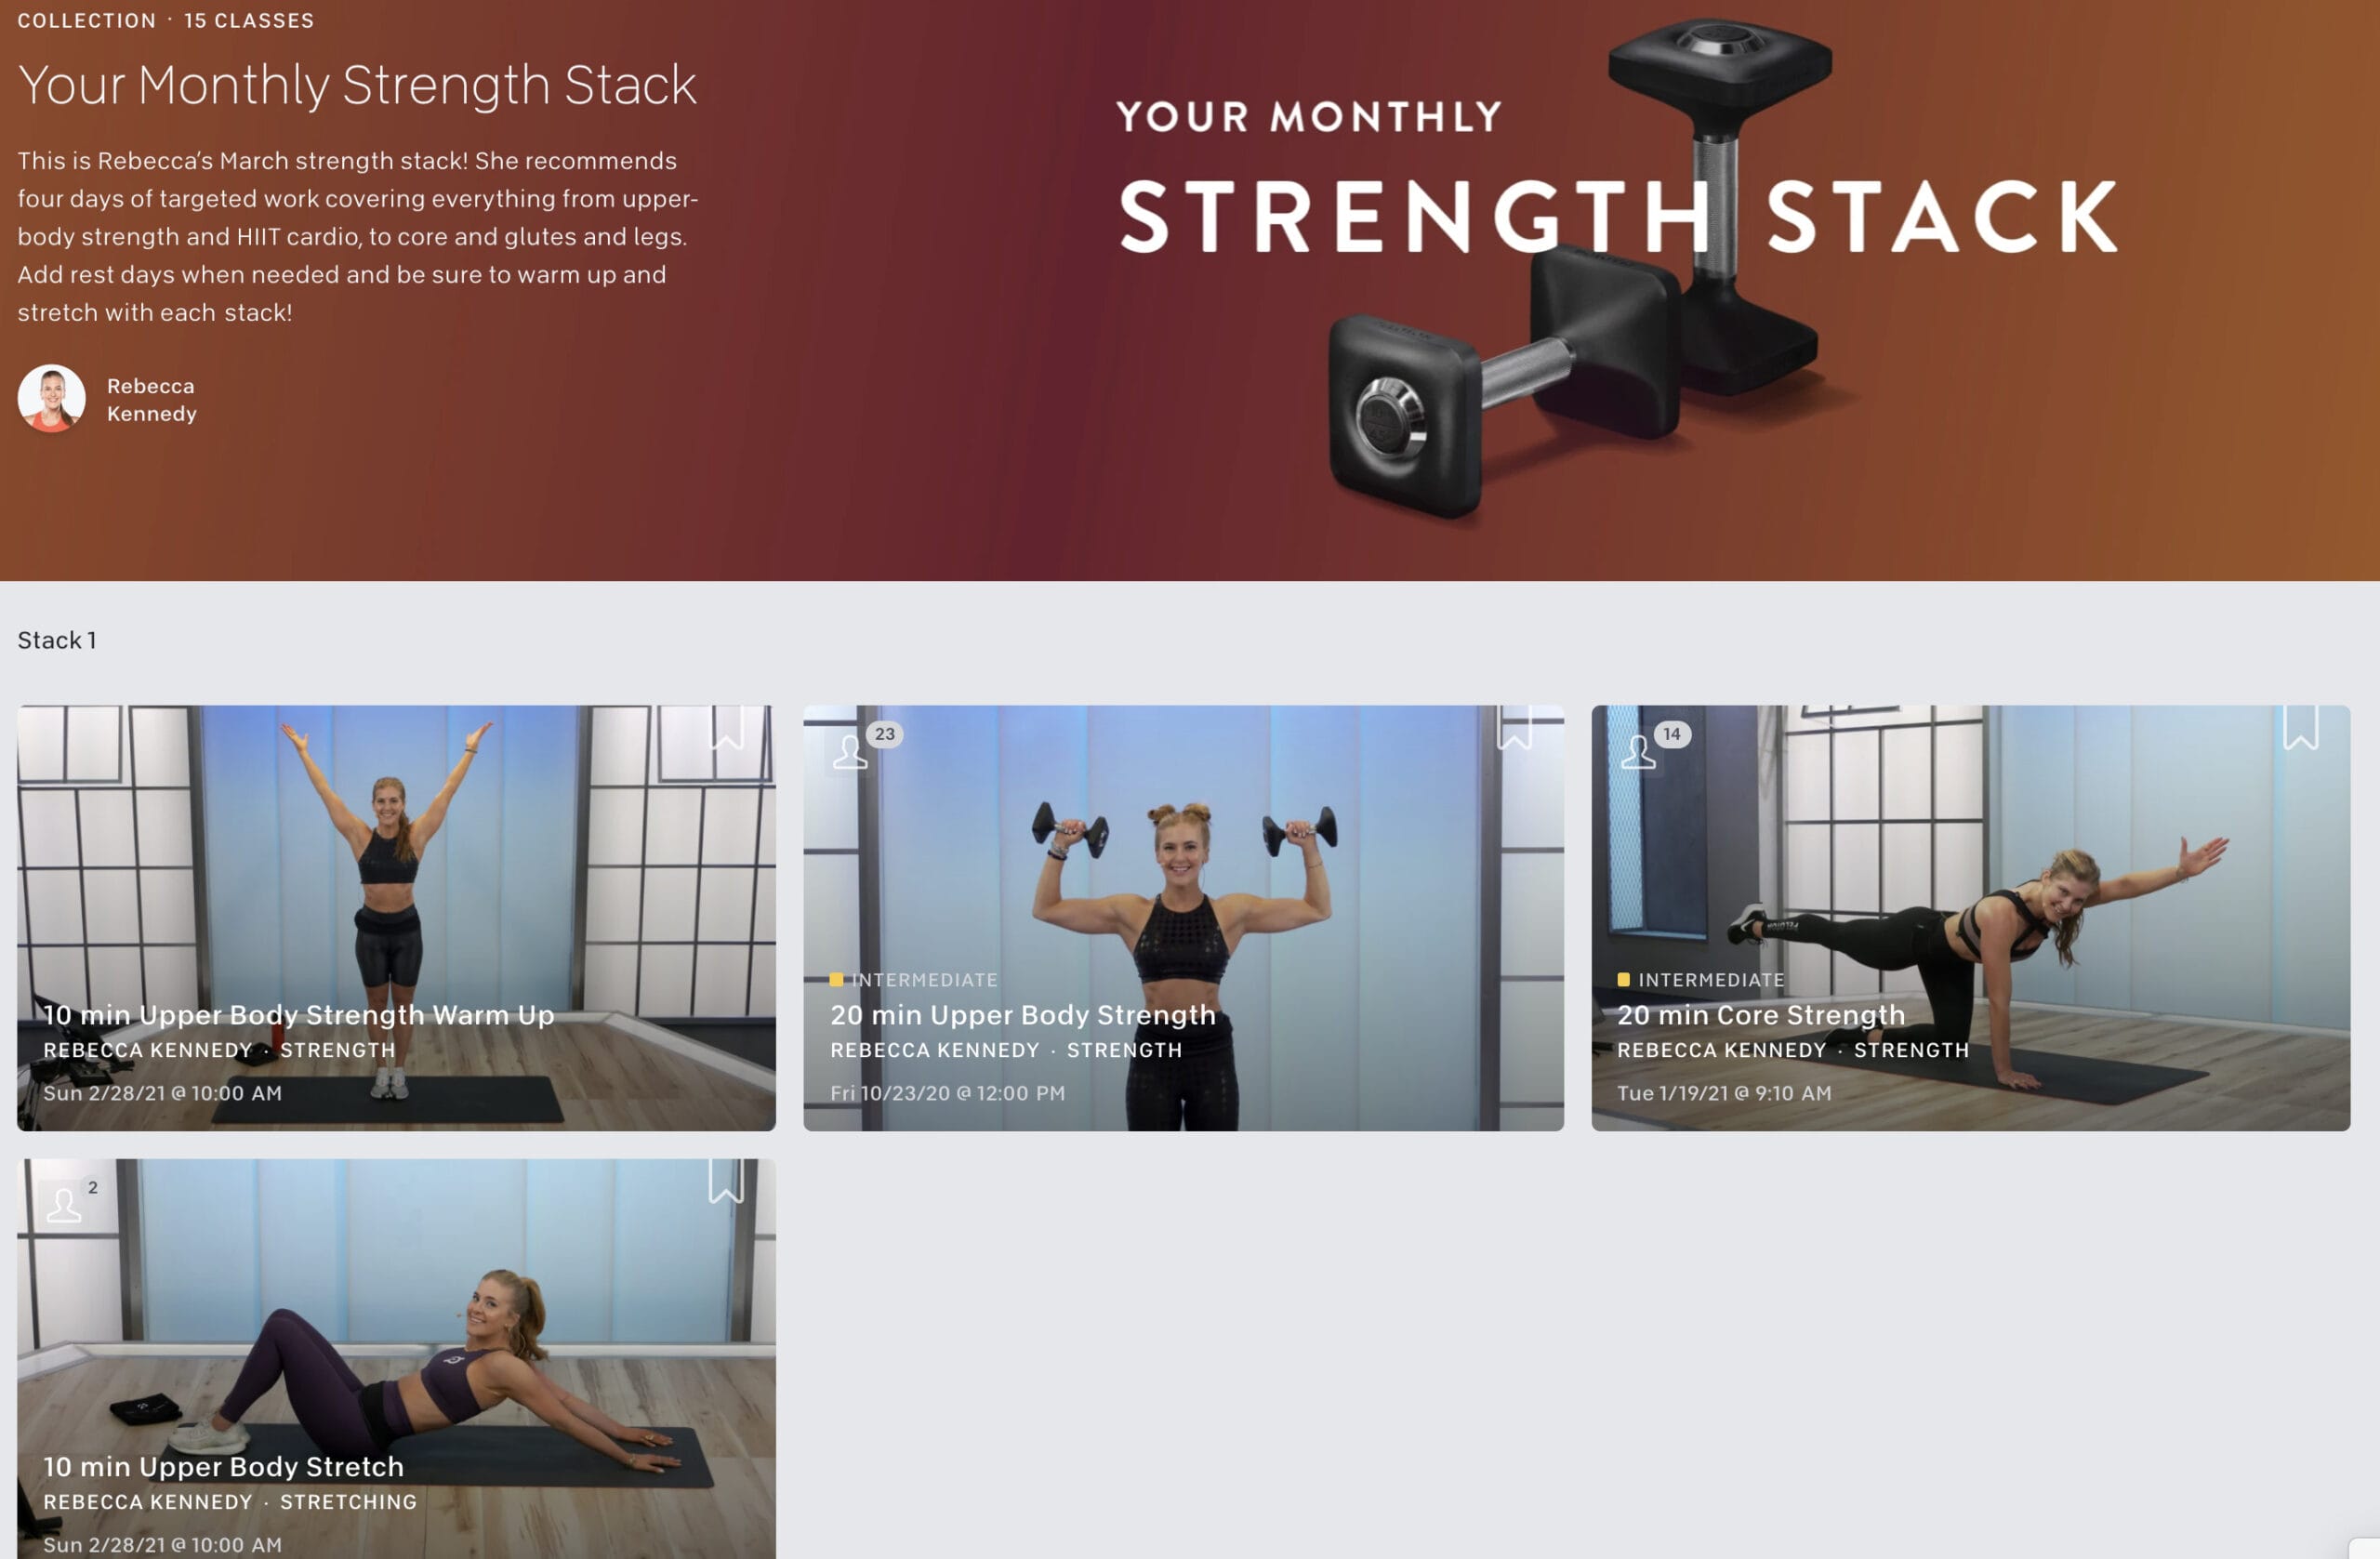 Screenshot of the collection from Peloton's website